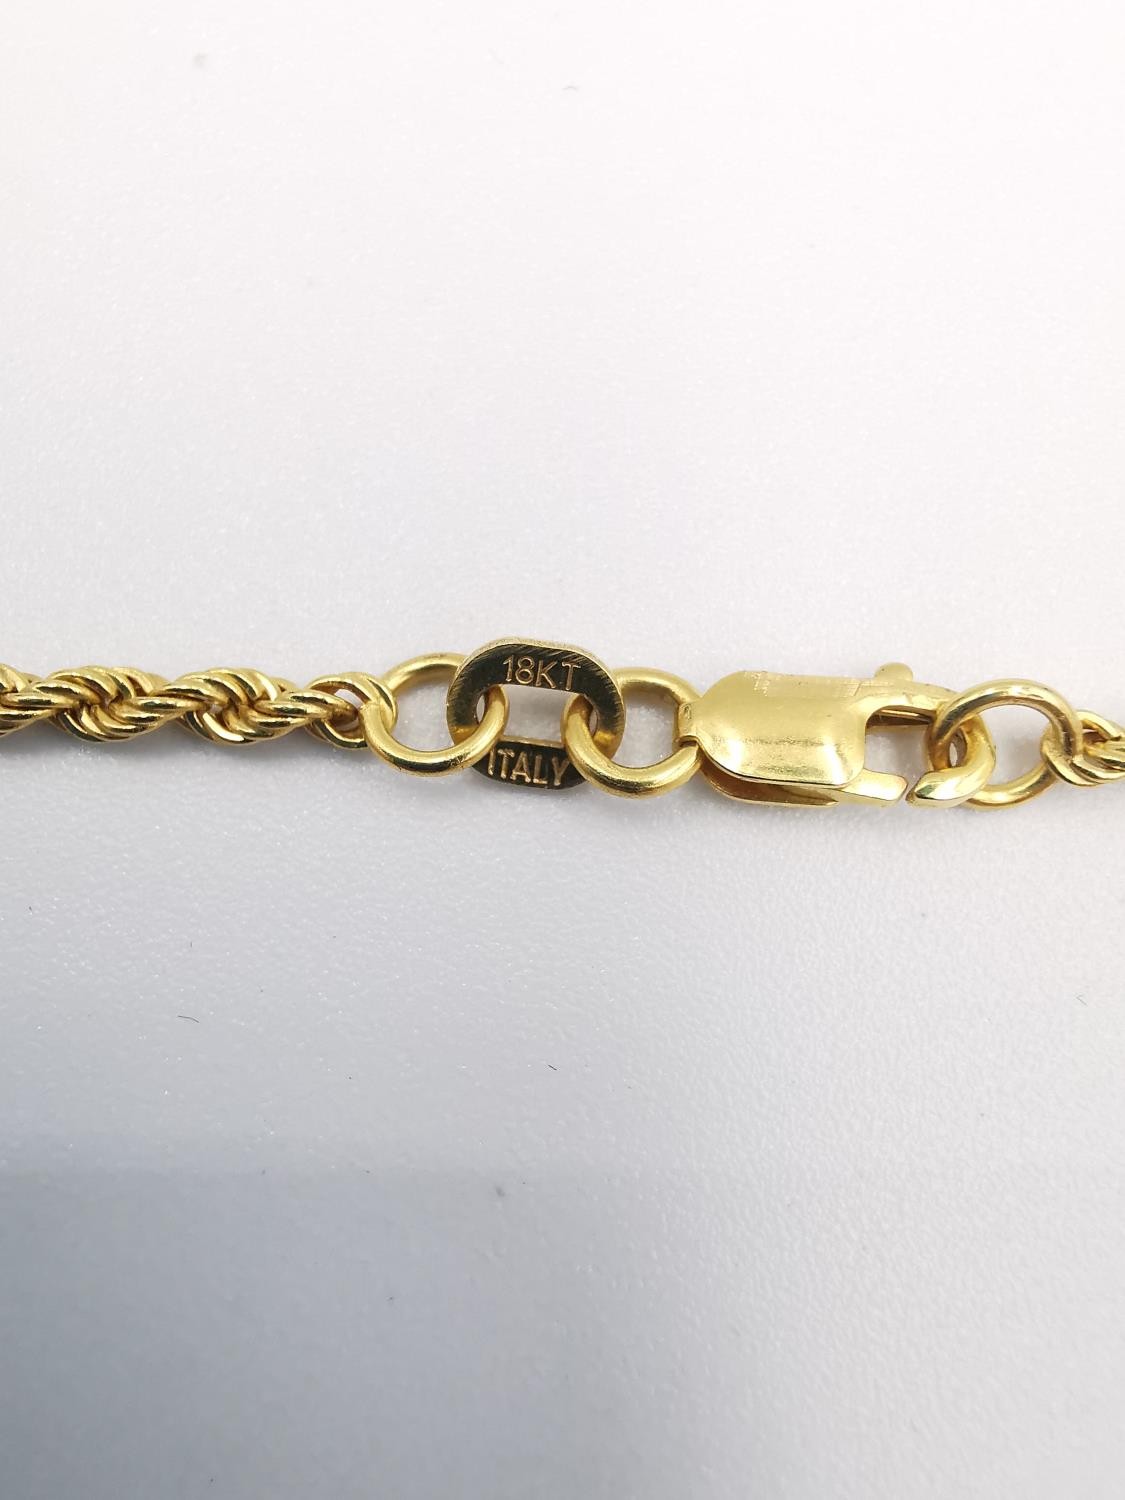 An 18ct yellow gold twist rope chain with lobster clasp. Hallmarked:18KT, Italy, 750. L.64cm - Image 5 of 5